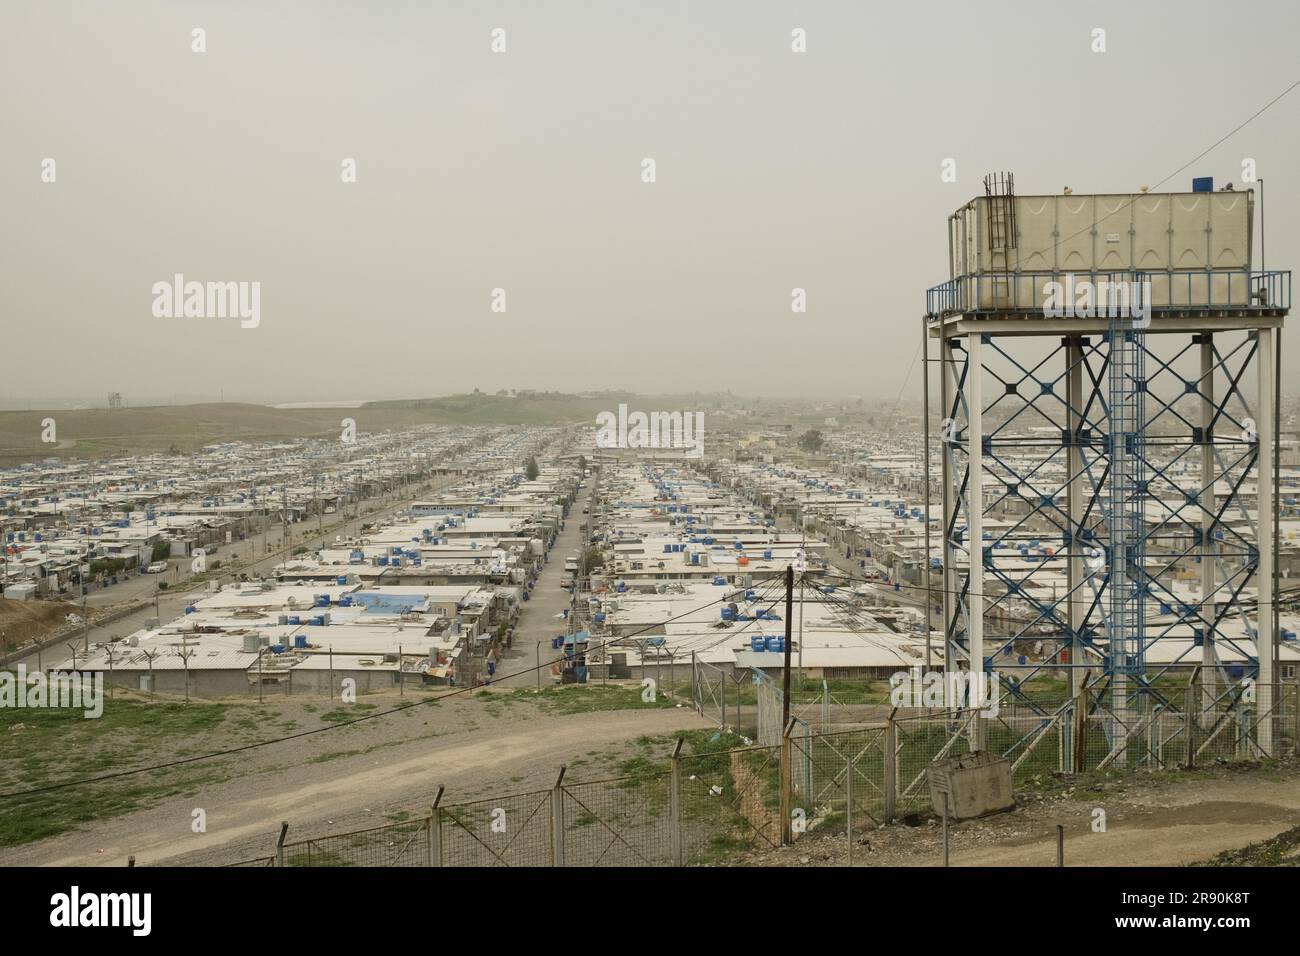 Gabriel Gauffre / Le Pictorium -  Bashur -  17/3/2021  -  Iraq / Iraqi Kurdistan / Erbil  -  View of the Kawergosk refugee camp.  From the ashes of the 2003 American invasion of Iraq and the toppling of Saddam Hussein's regime, Iraq's Kurds managed to wrestle a form of relative independence. Still technically part of Iraq, Iraqi Kurdistan, in the north of the country, enjoys a heightened level of independence.  To the Kurds, it is Bas?r (Bahsur), the southern province of the 4 composing what could one day be their own country, Kurdistan.  Bashur is a territory that has all the makings of a cou Stock Photo